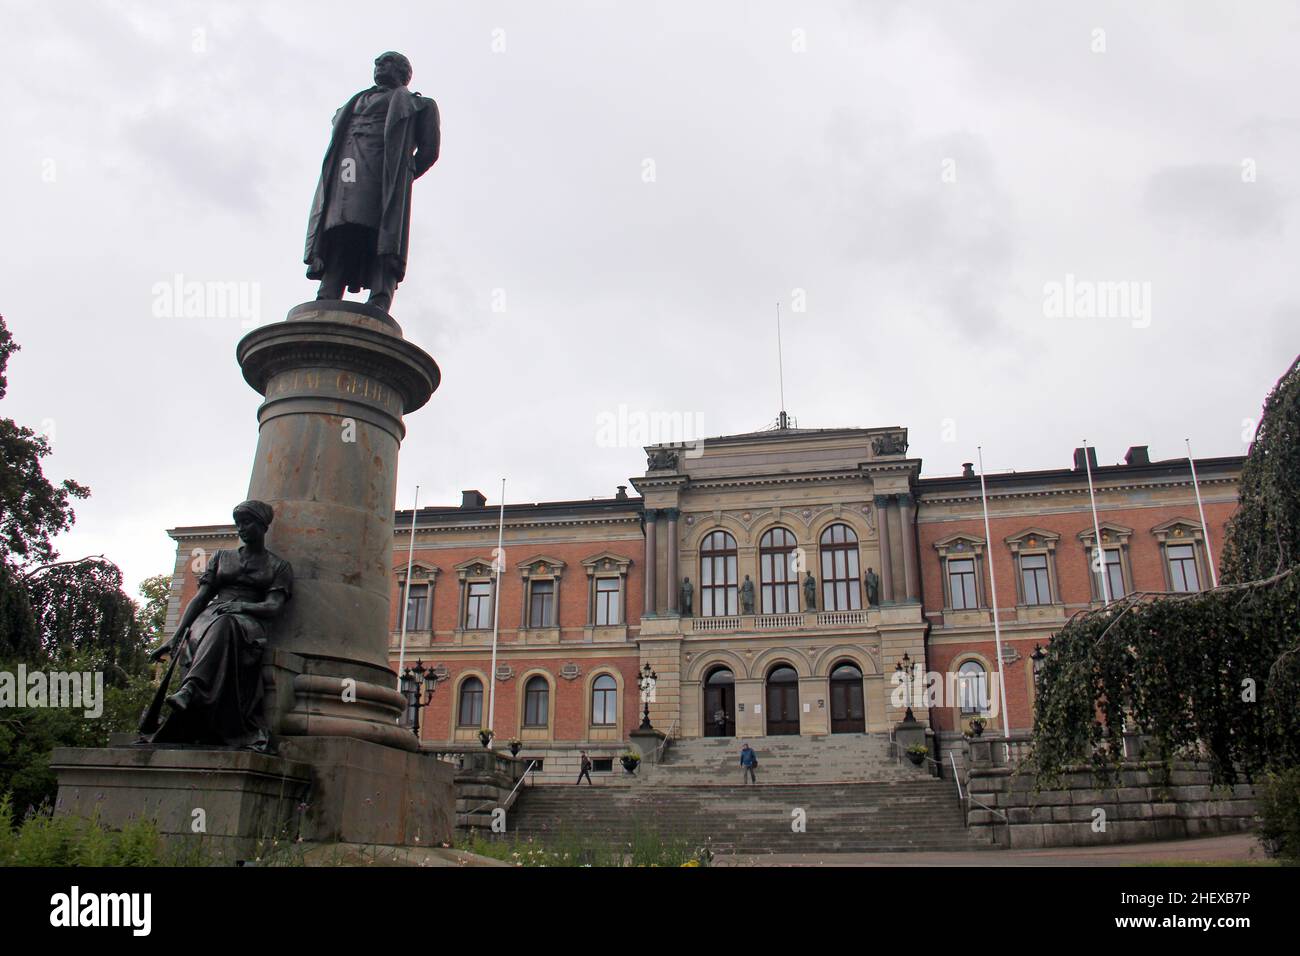 Statue of Erik Gustaf Geijer, historian and the Uppsala University's official of 19th century, in front of the University Hall, Uppsala, Sweden Stock Photo